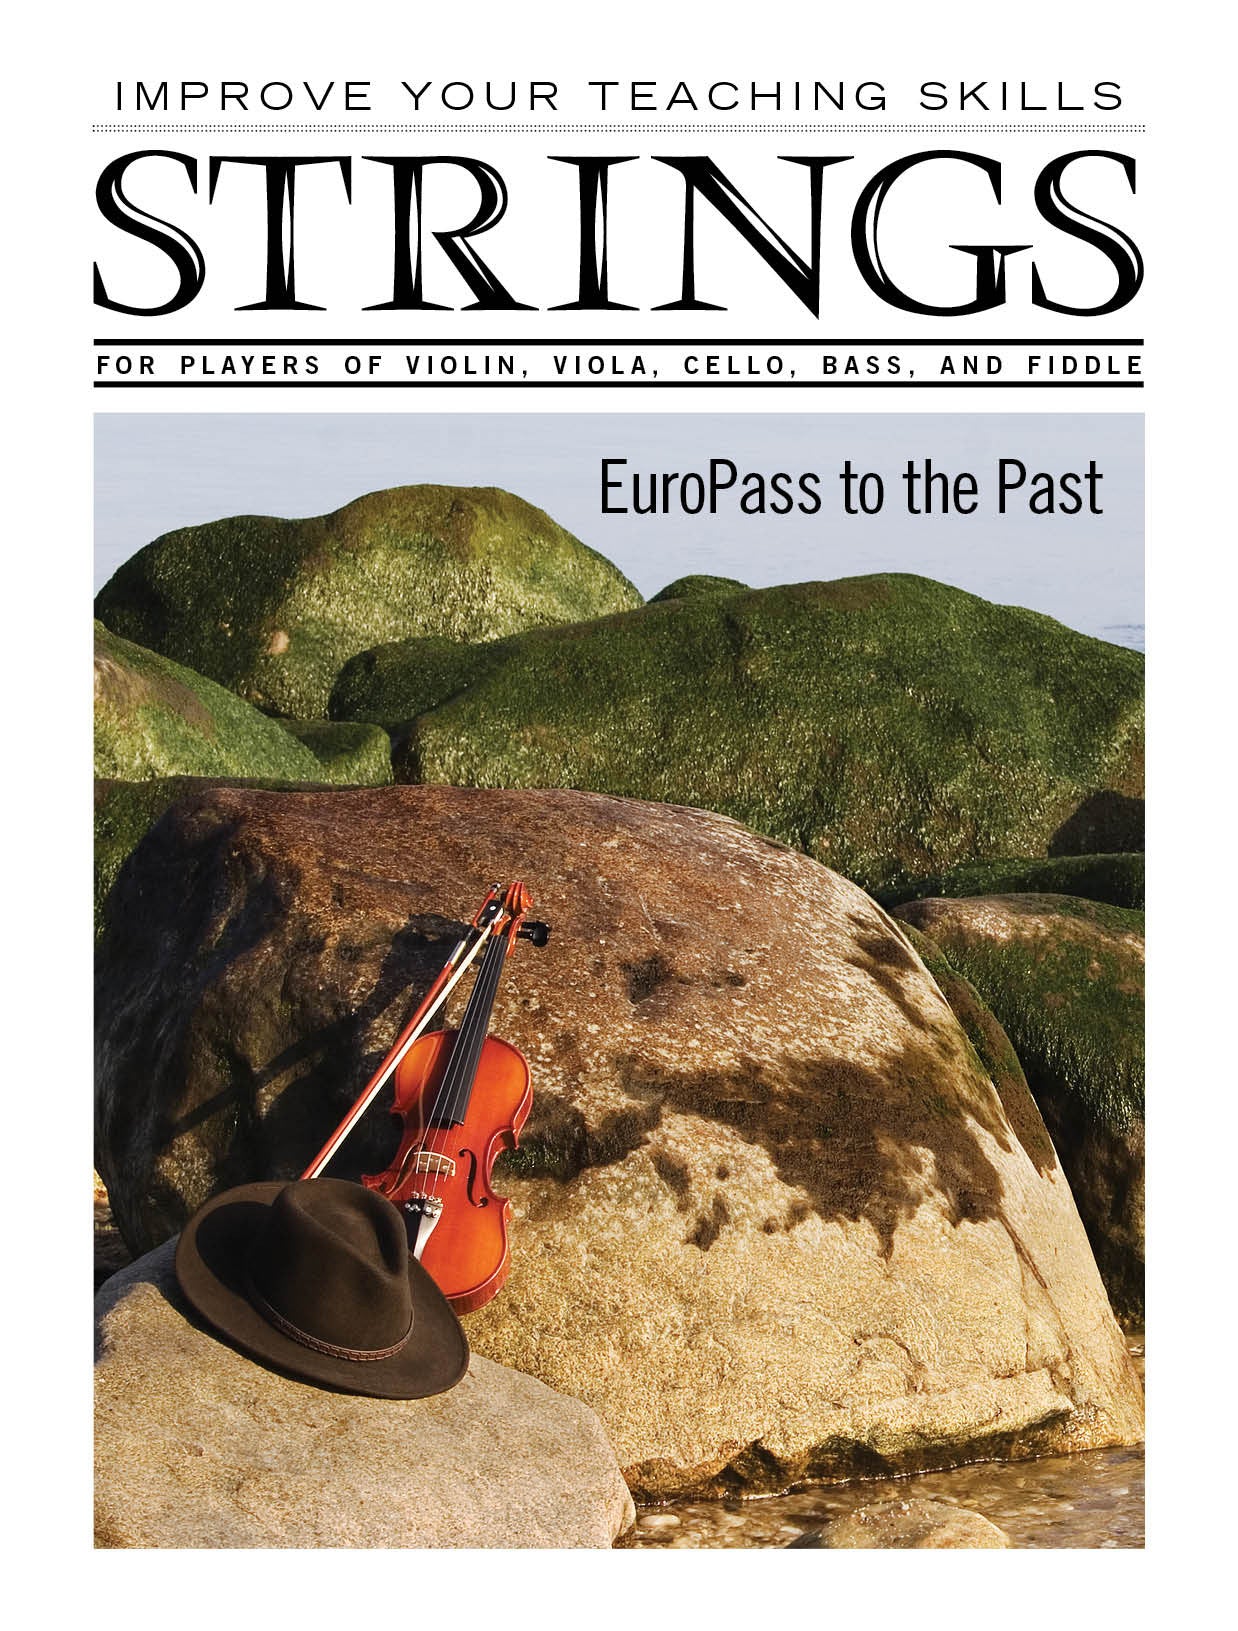 Improve Your Teaching Skills:  EuroPass to the Past